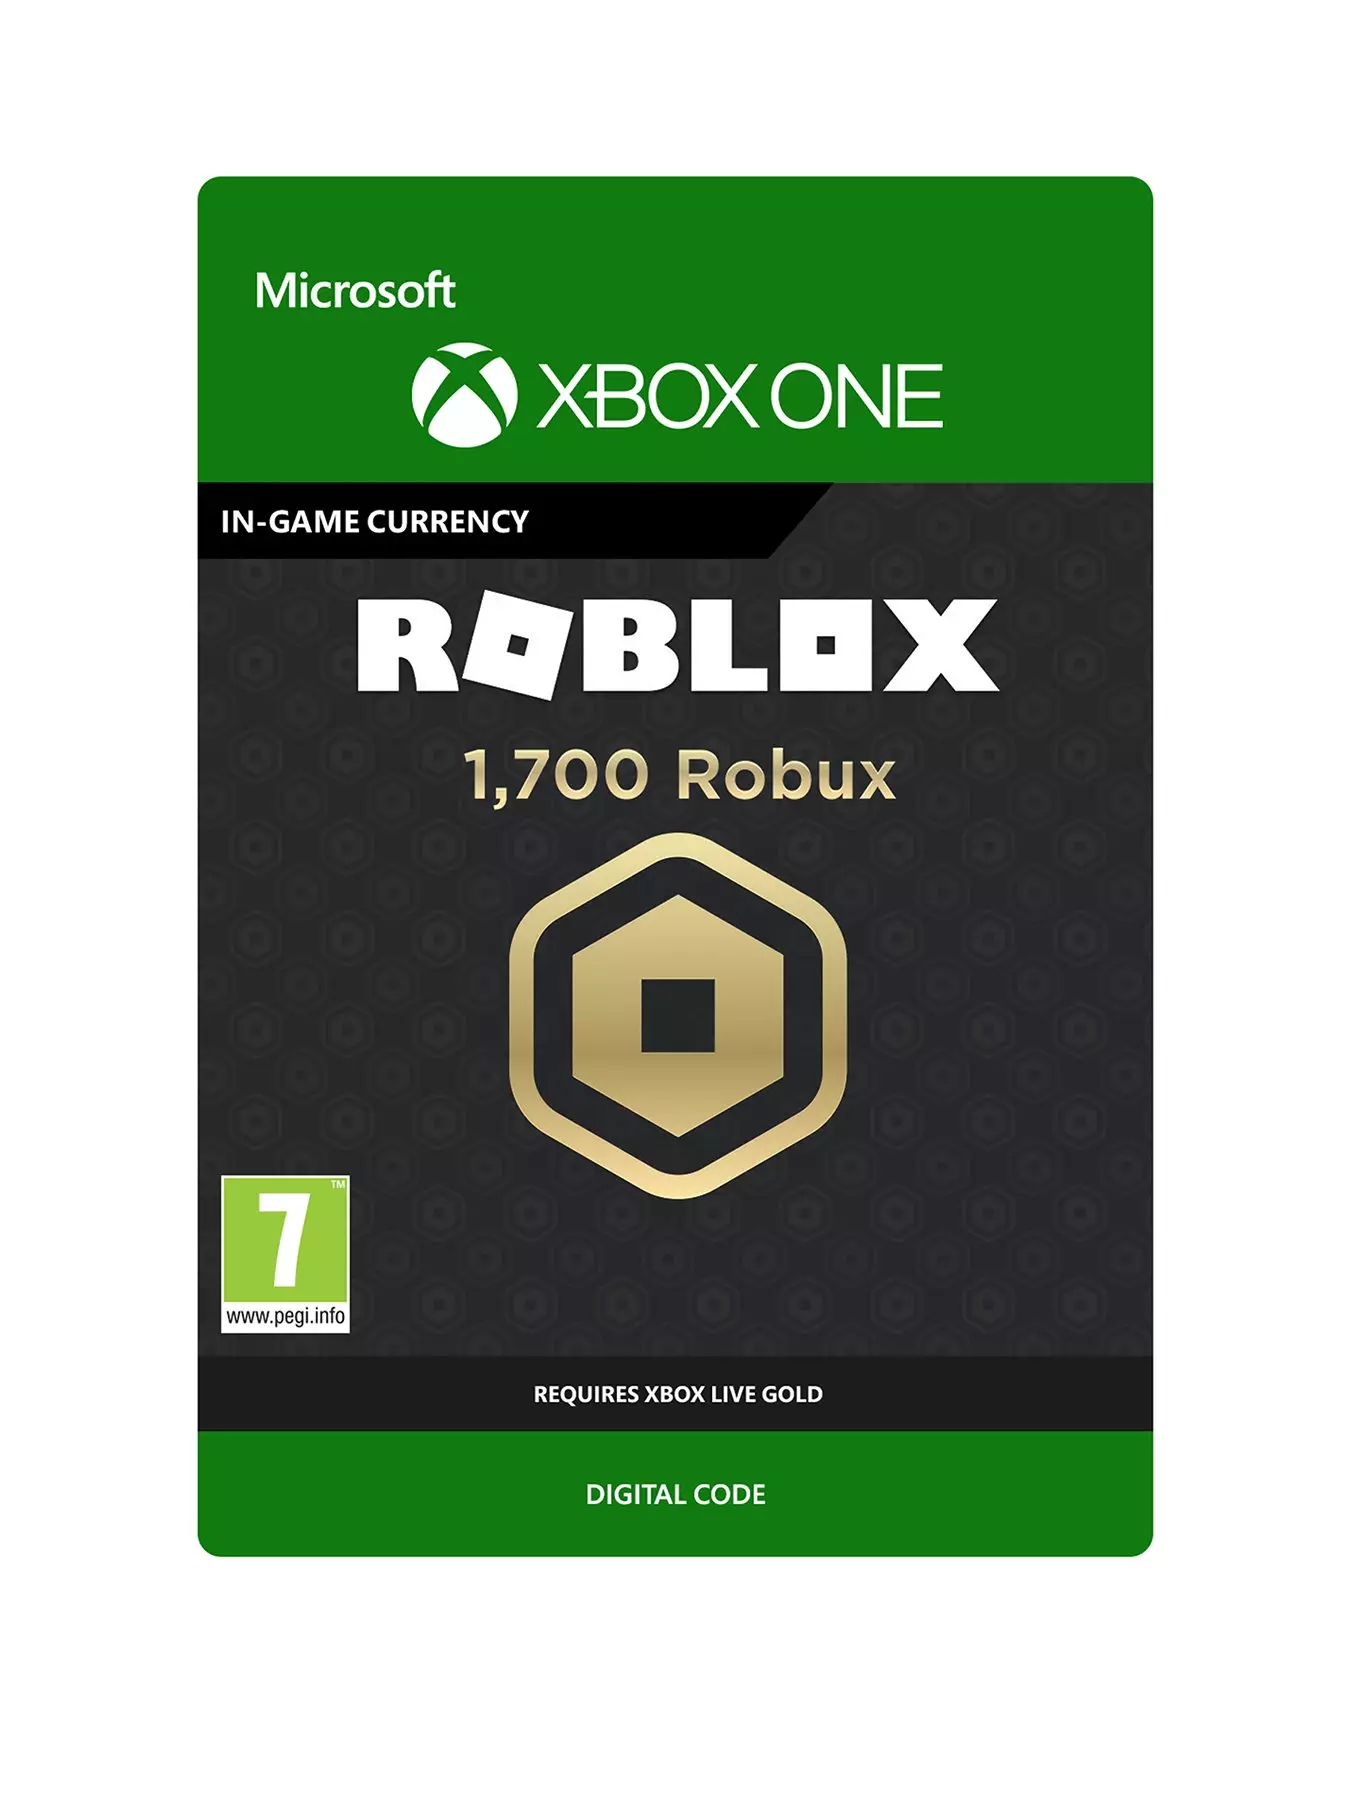 Digital Games Gaming Dvd Www Littlewoods Com - 2750 robux roblox